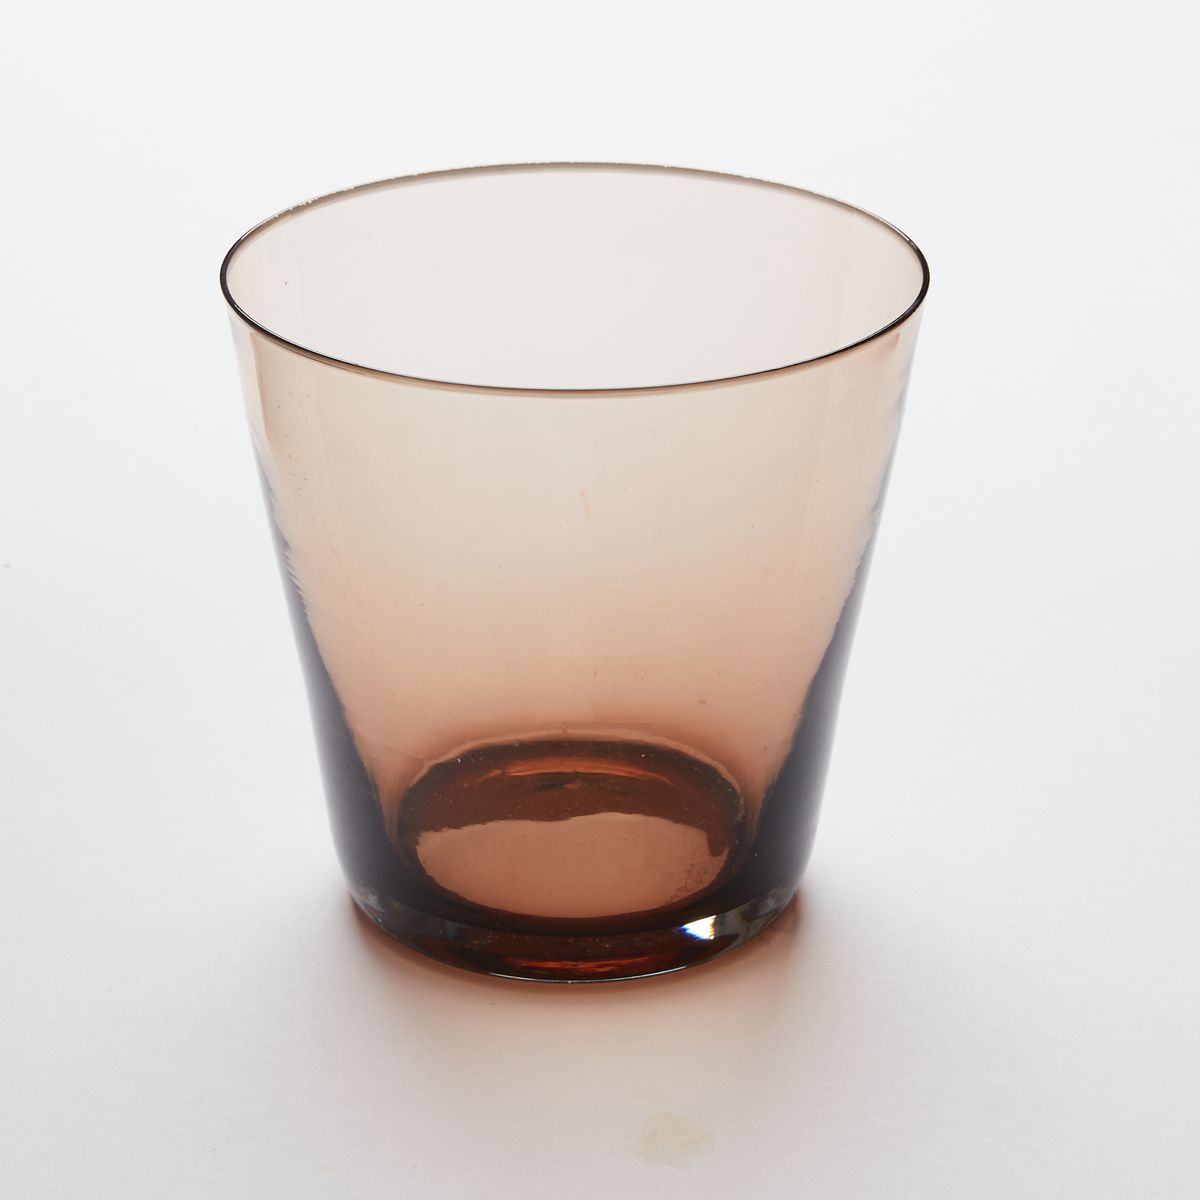 A short drinking glass made of walnut colored glass